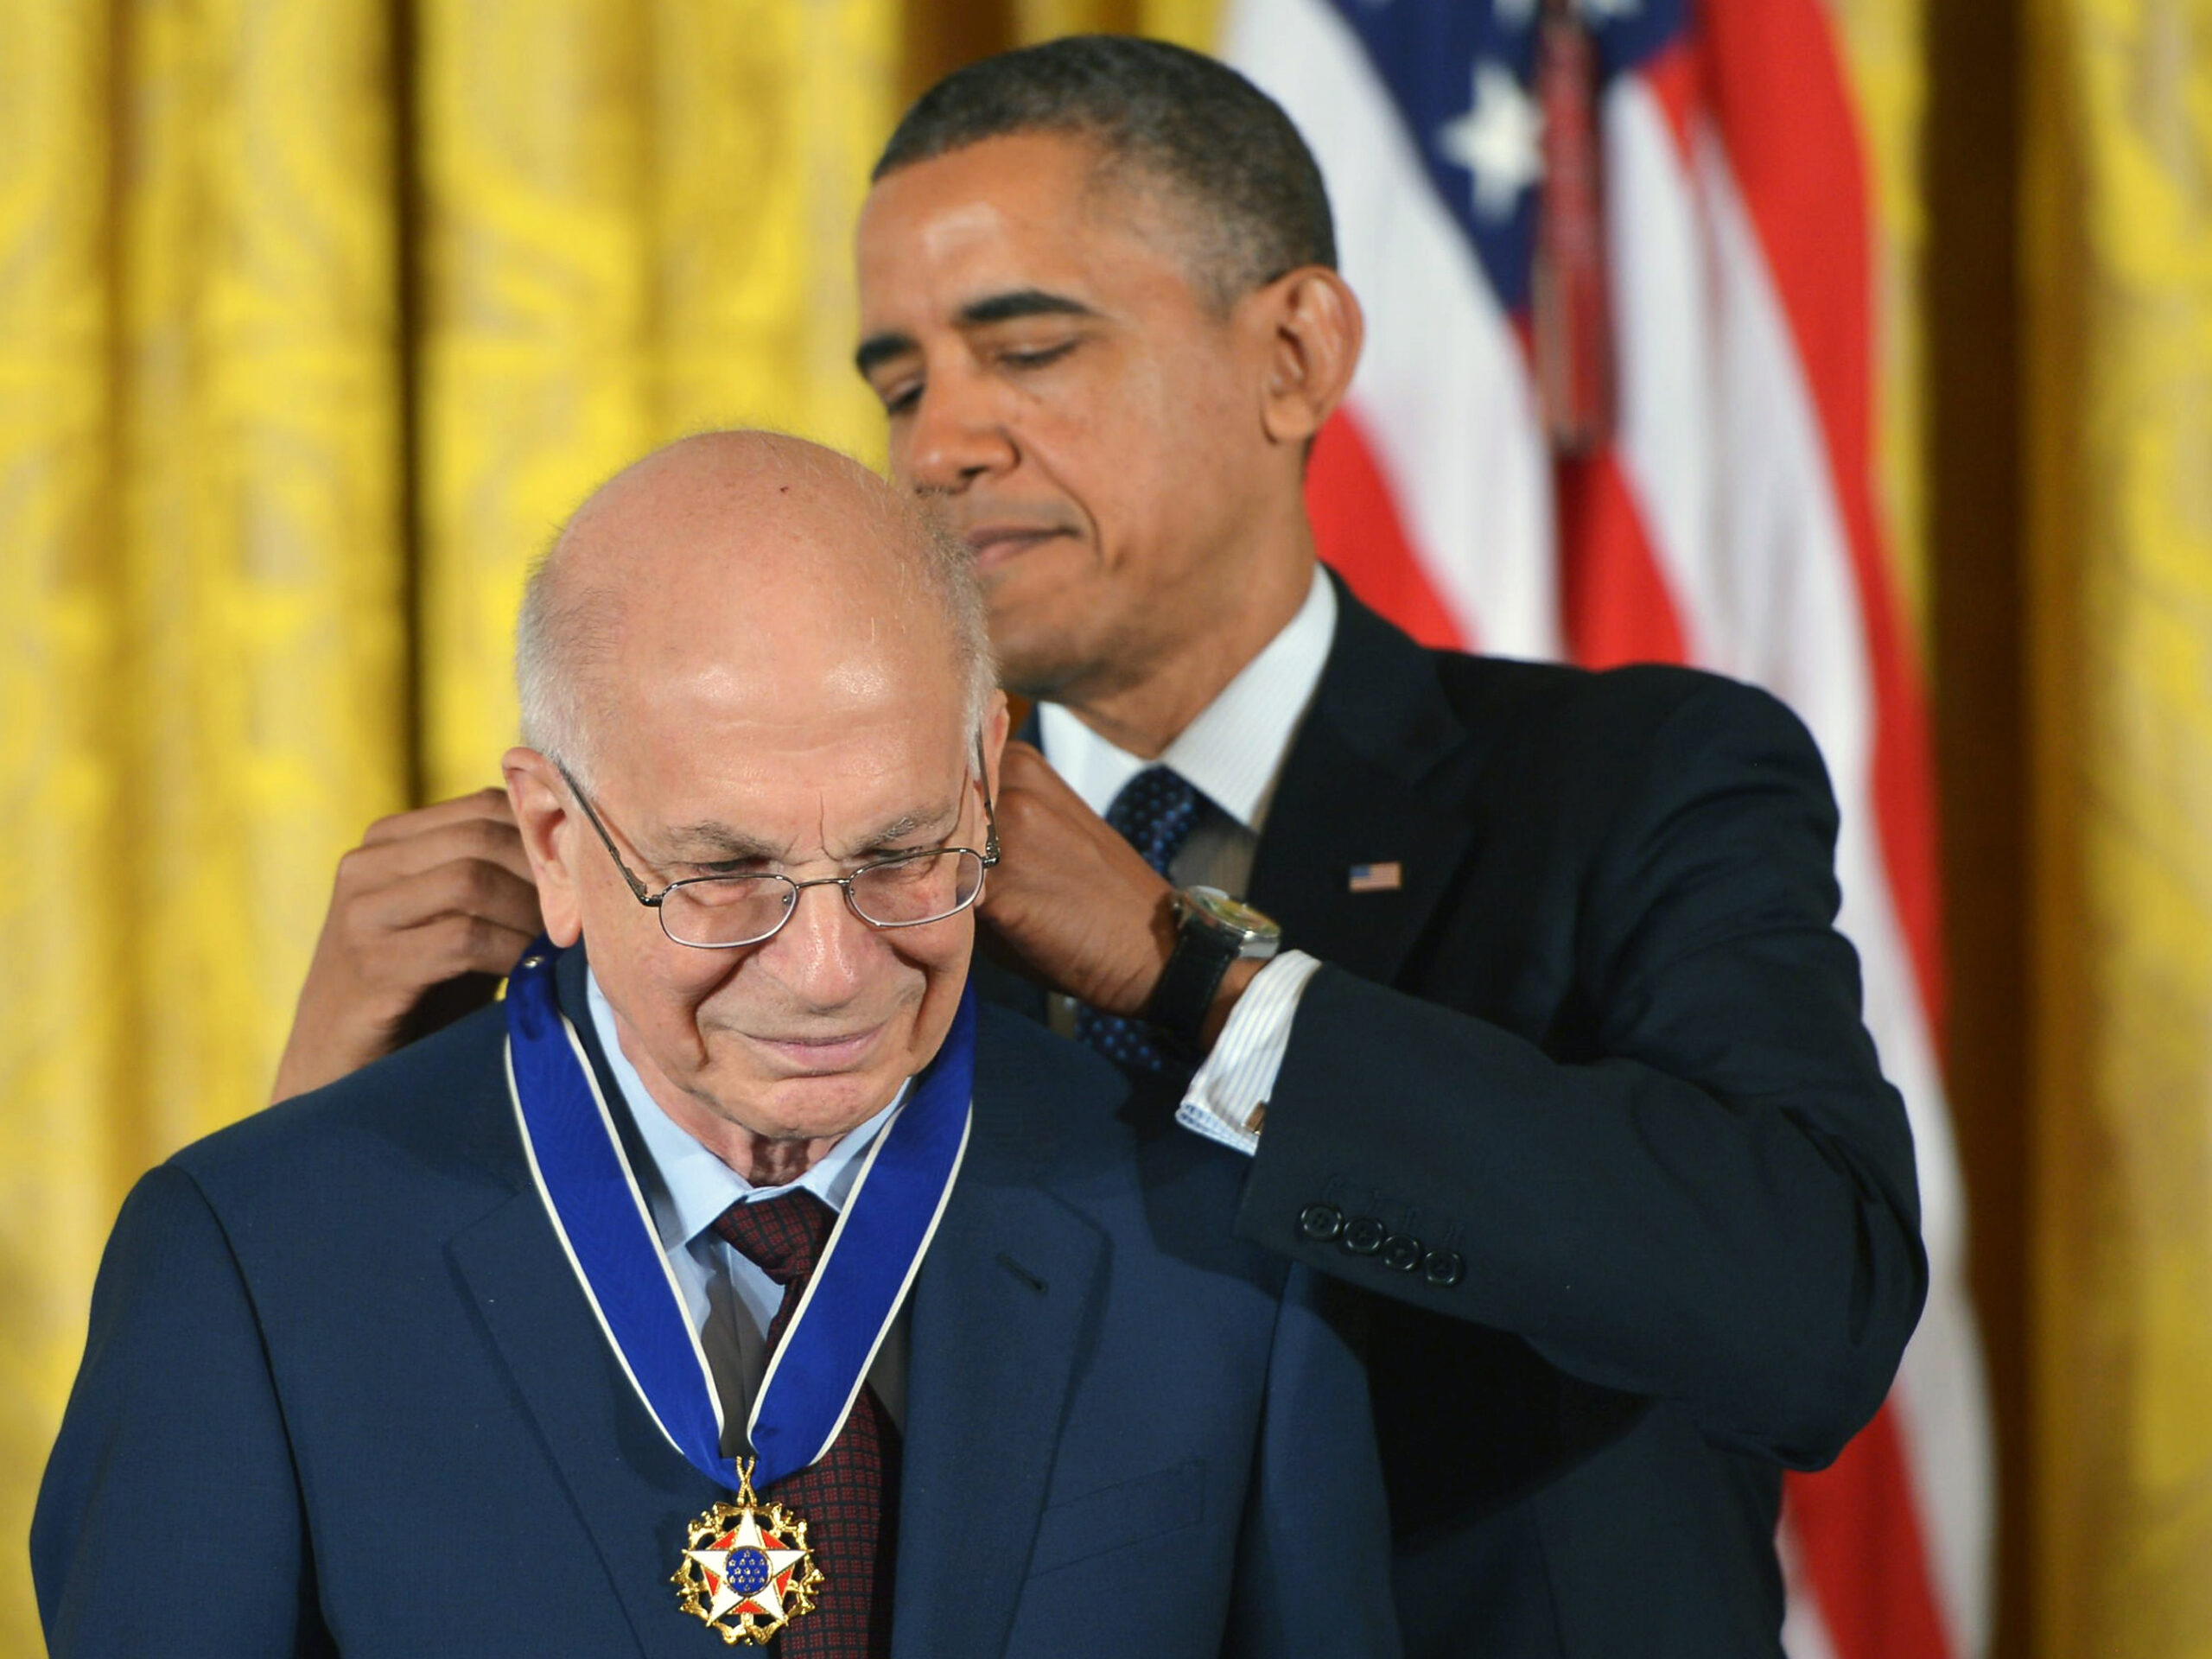 Daniel Kahneman, who received the Presidential Medal of Freedom in 2013, has died. He merged psychology and economics to help launch the growing field of "behavioral economics."